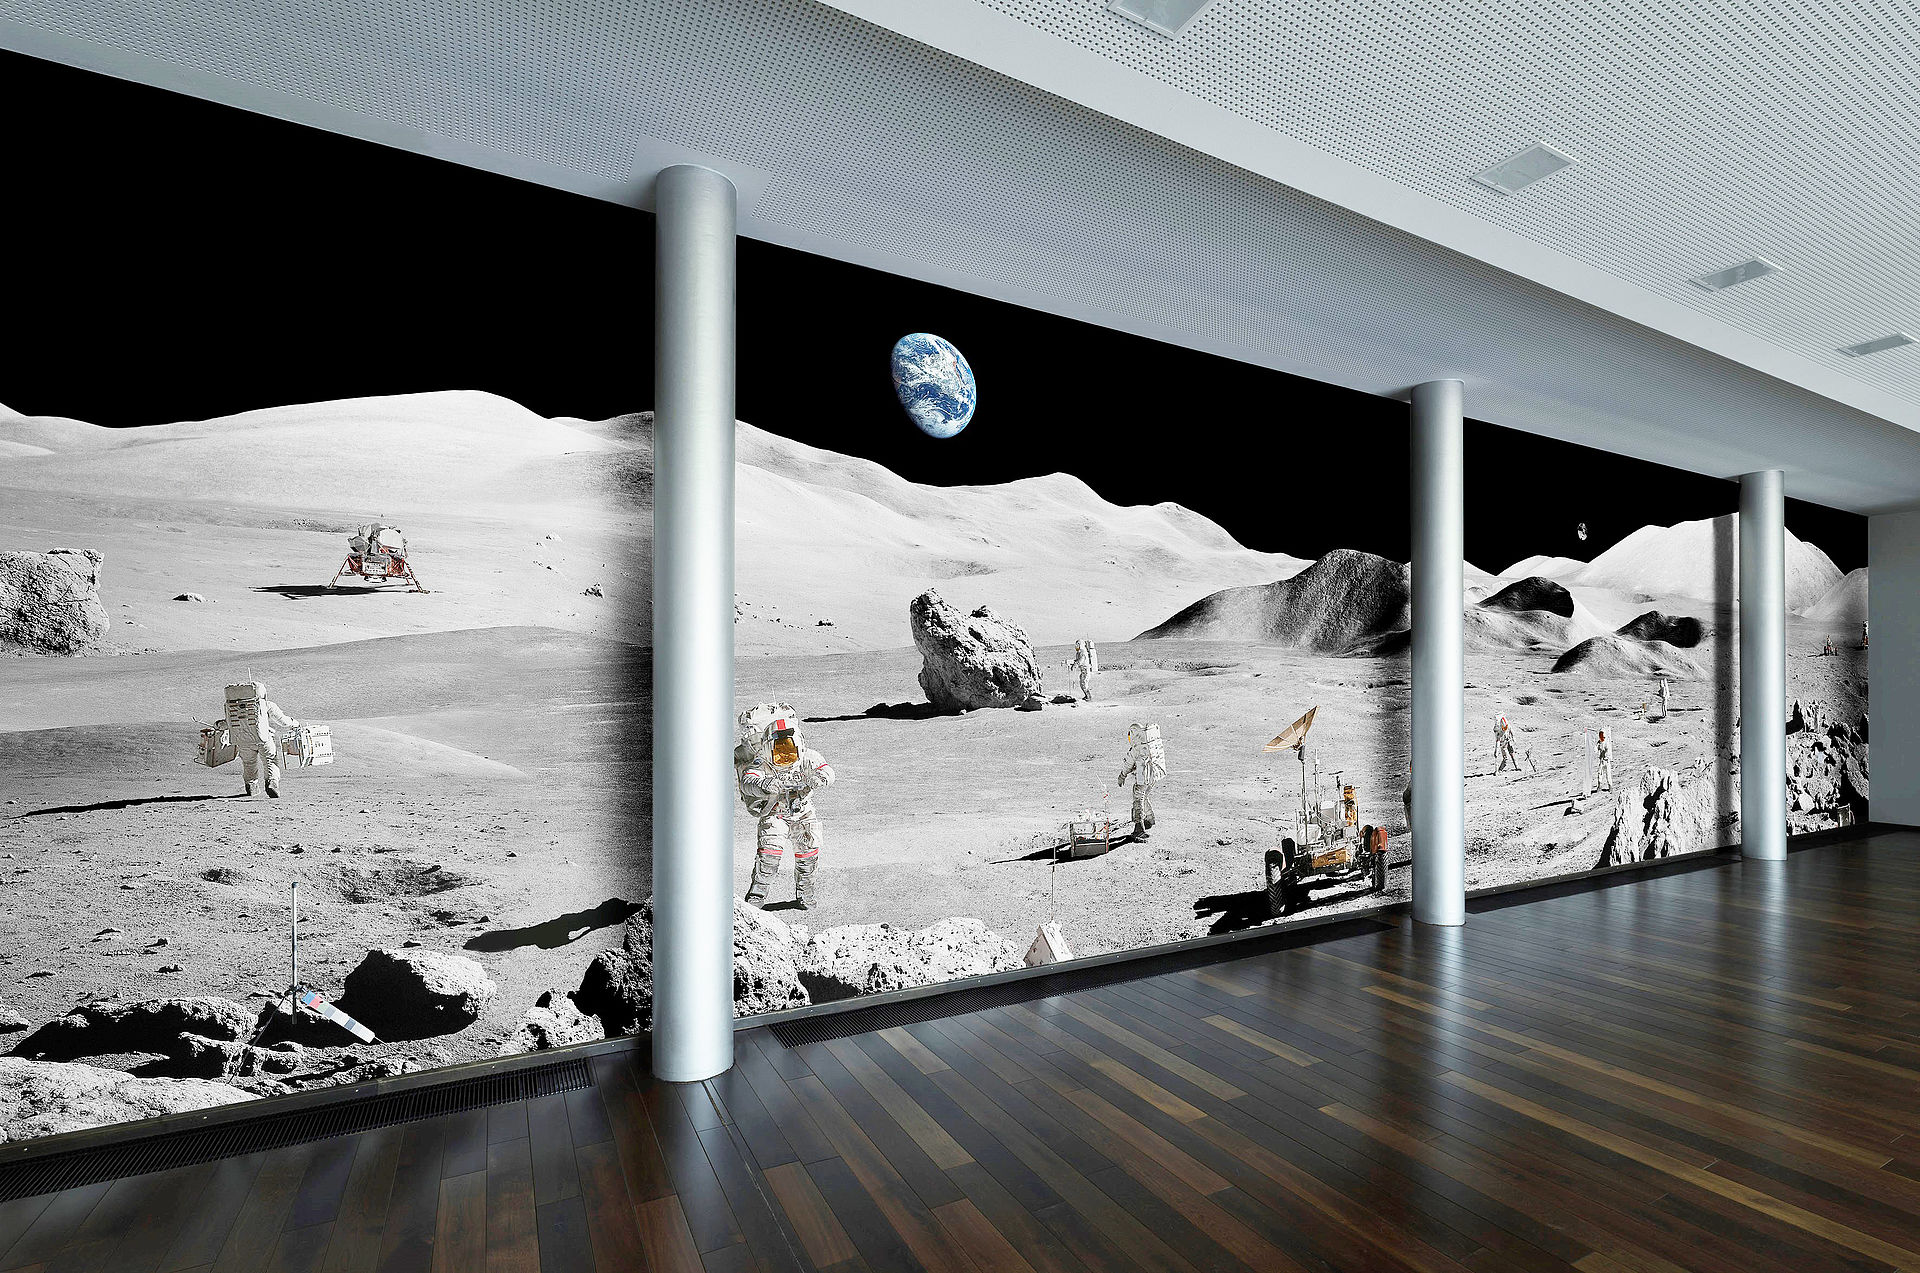 20-meter moonwalk: How the “Lunar Explorers” photographic work of art by Michael Najjar found its way to OHB